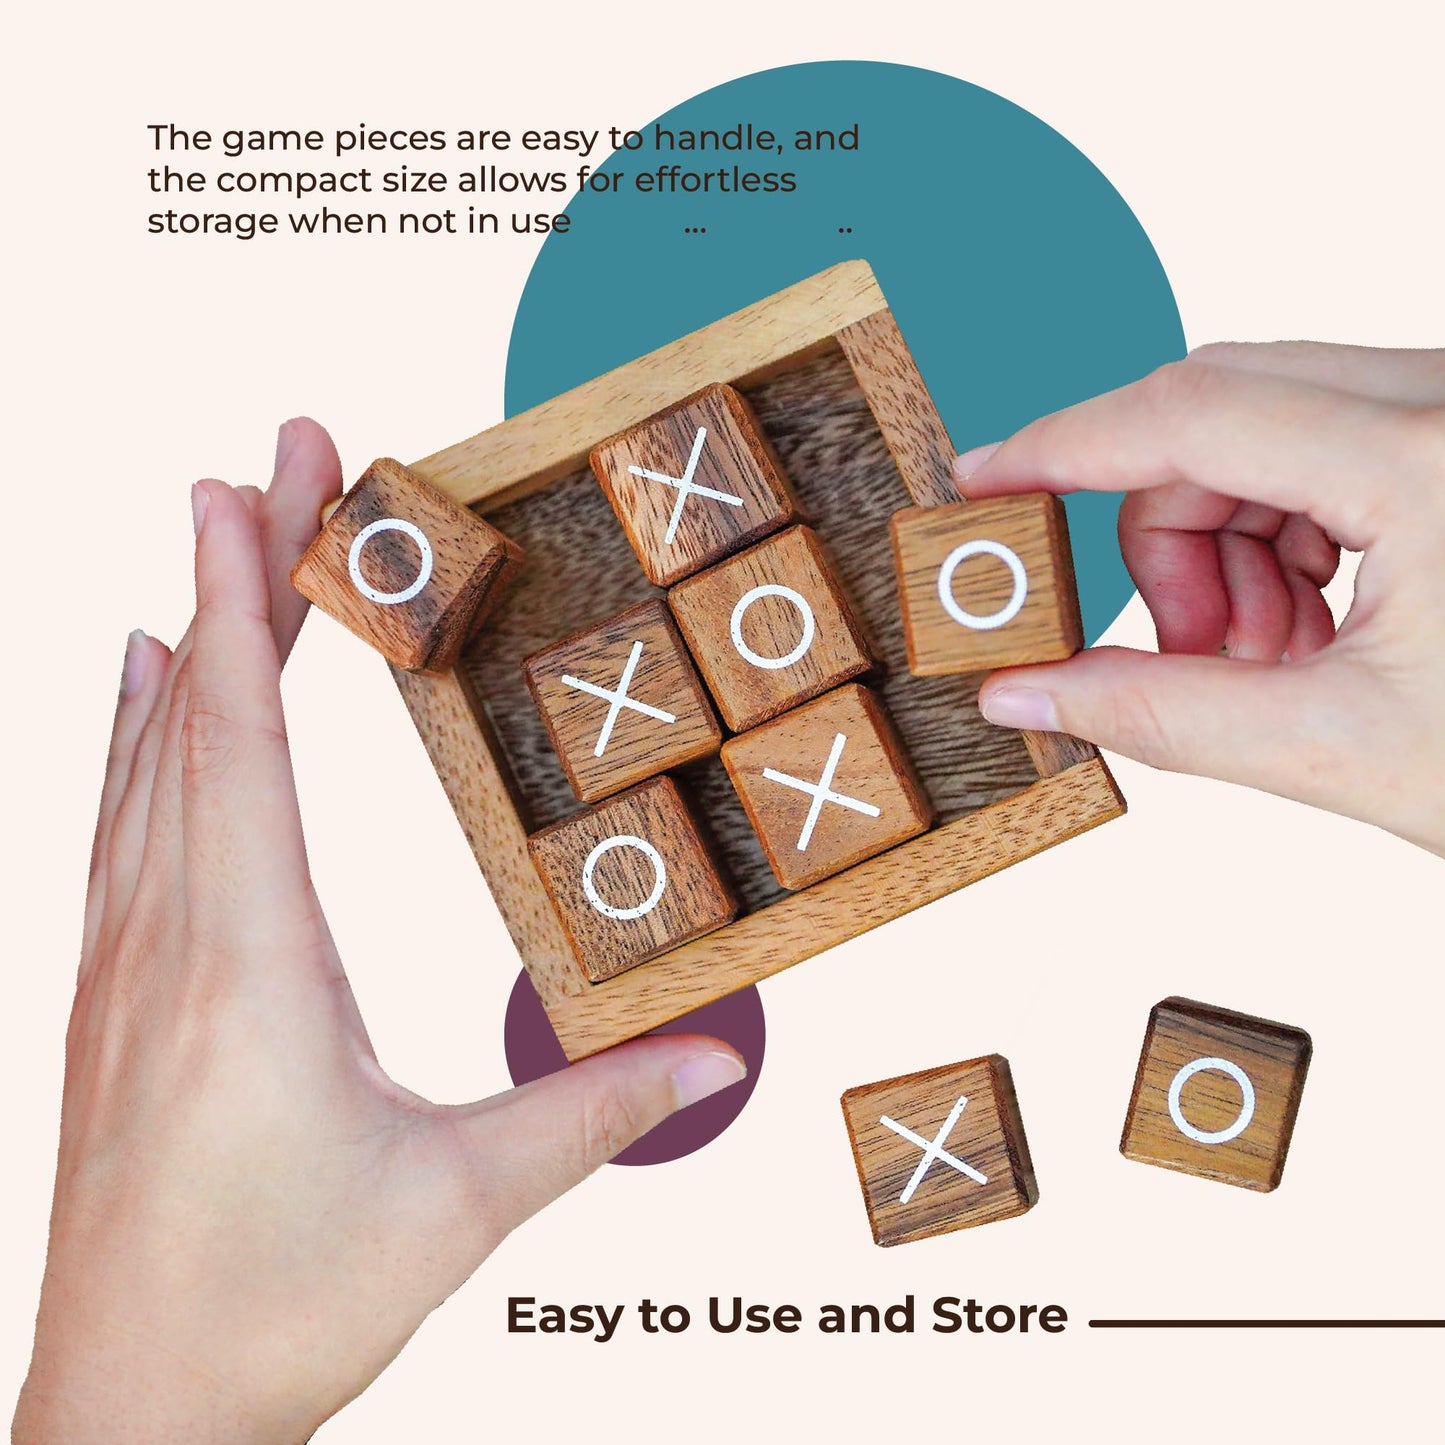 BSIRI Tic Tac Toe for Kids and Adults Coffee Table Living Room Decor and Desk Decor Family Games Night Classic Board Games Wood Rustic for Families